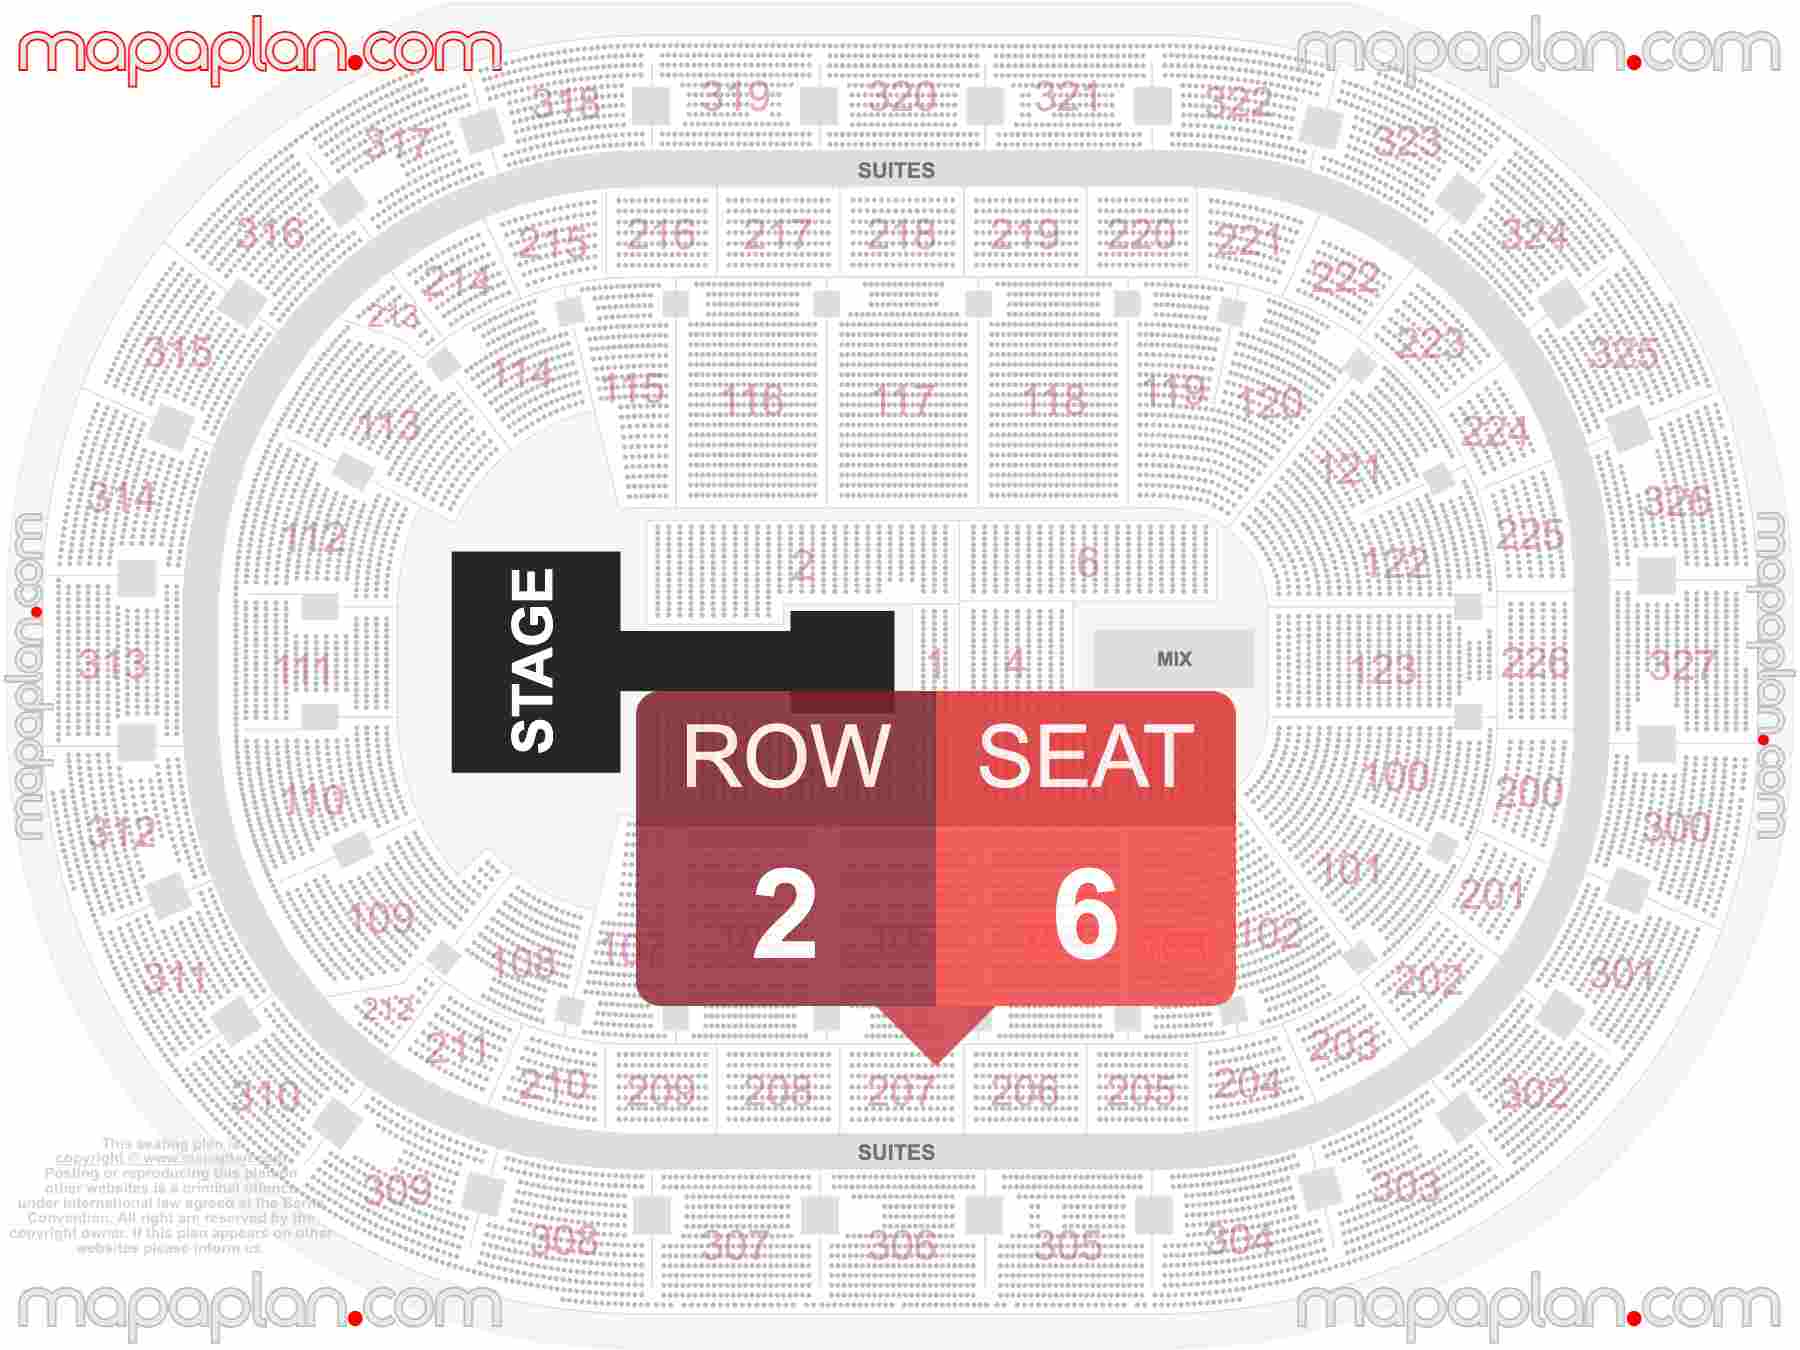 Buffalo KeyBank Center seating chart Concert with extended catwalk runway B-stage seating chart with exact section numbers showing best rows and seats selection 3d layout - Best interactive seat finder tool with precise detailed location data